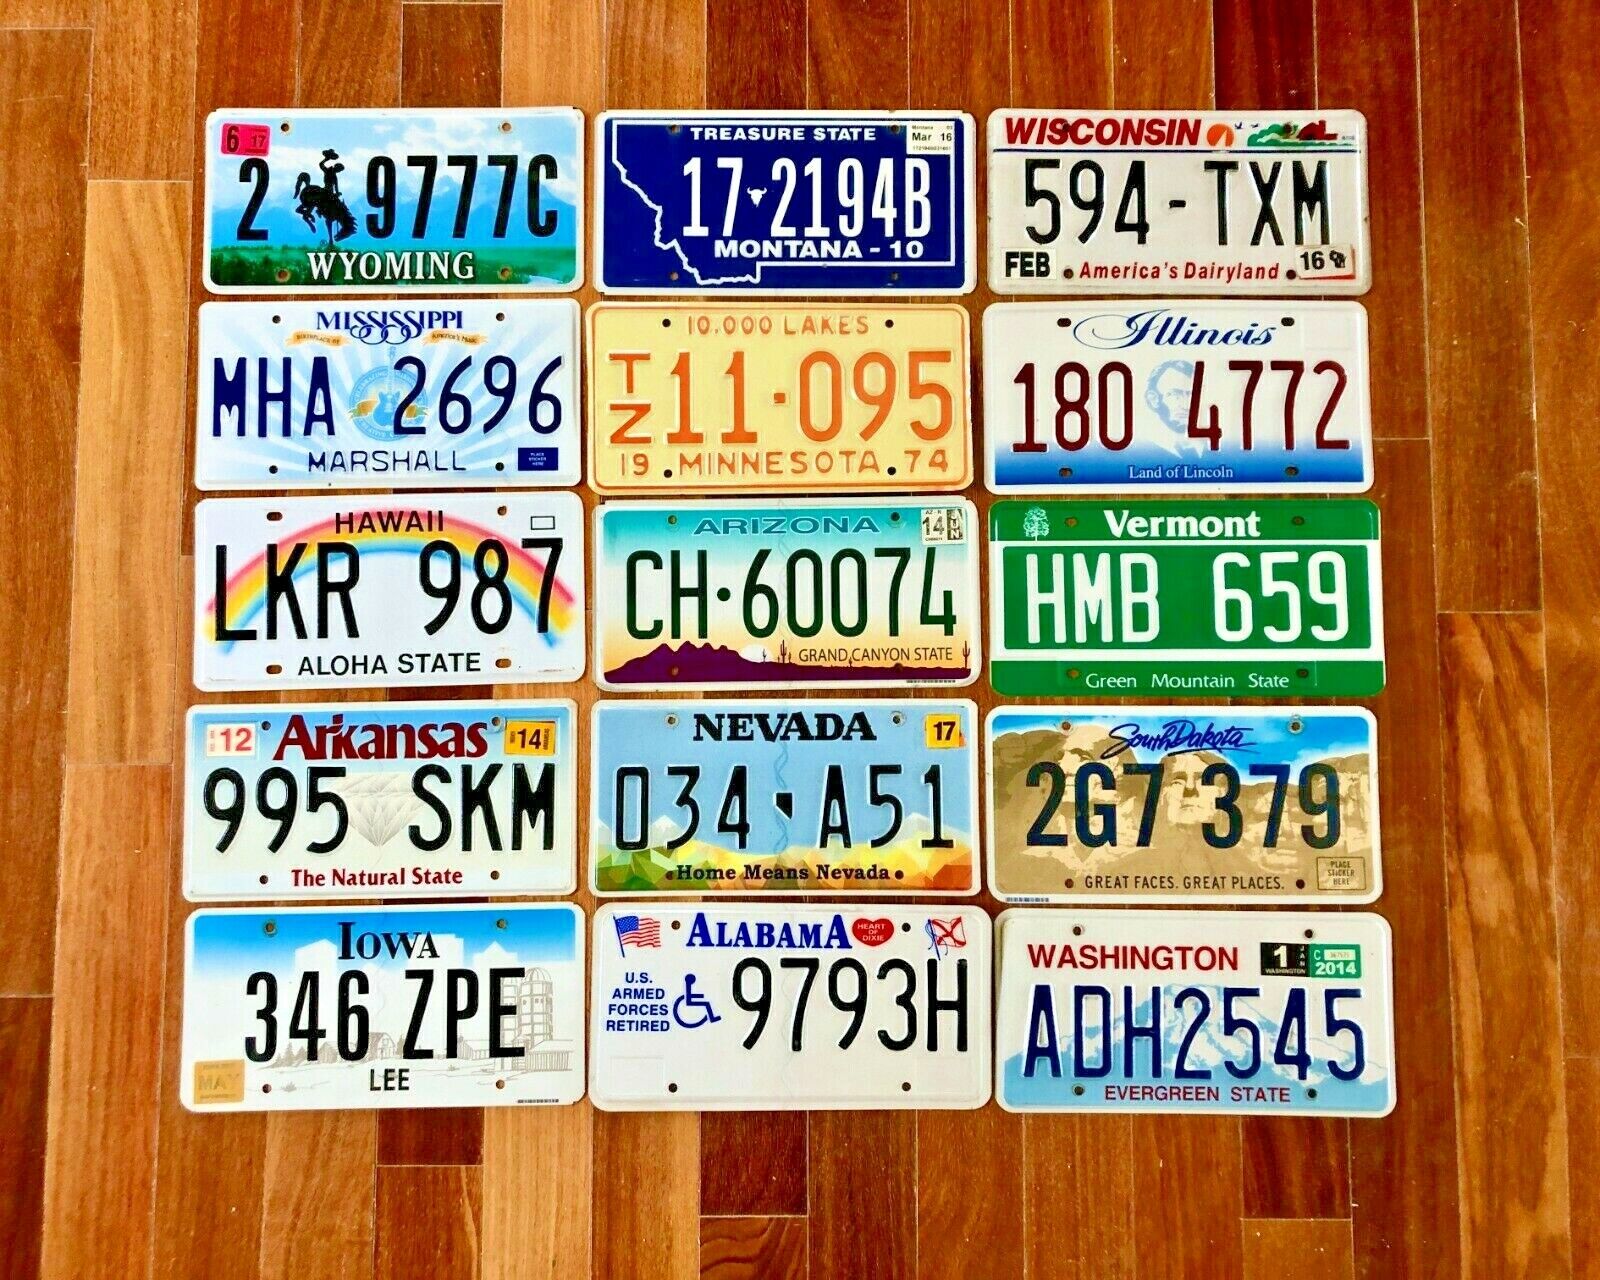 Set of 15 Colorful License Plates from 15 Different States